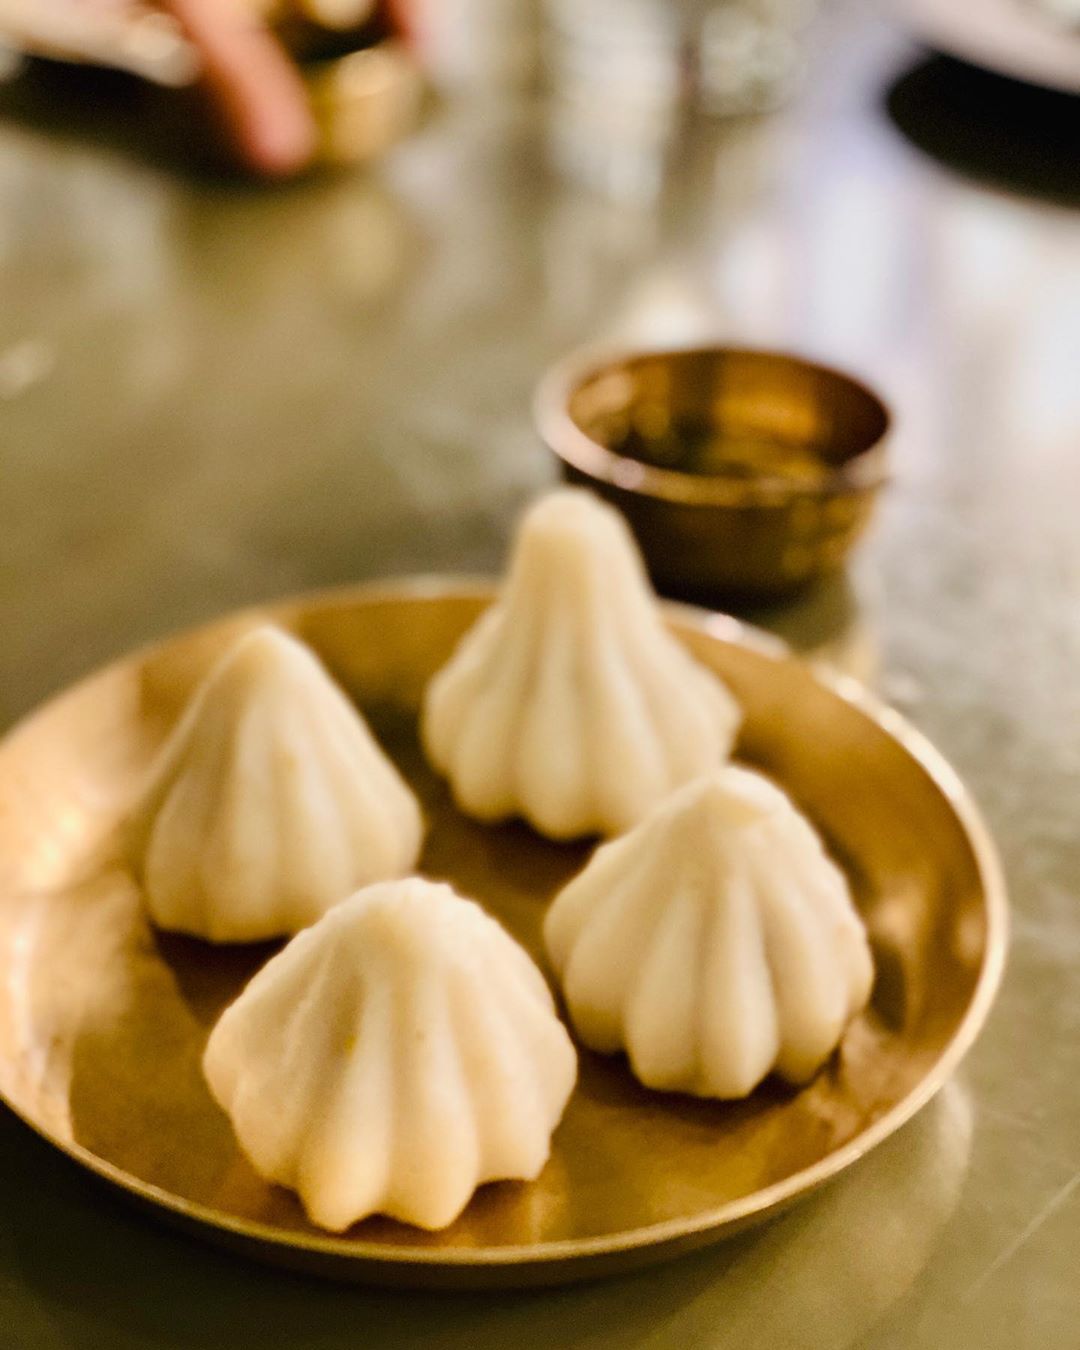 Growing up in Maharashtra, I came to grow fond of its culture and its scrumptious food. 
From Bappa’s favourite food - modak to lipsmacking cilantro fritters aka kothimbir vadi. 
The food reminded me of my home town Kolhapur. 
Meeting people from Maharashtra or eating Marathi food brings out that smile and feeling of joy within.
#maharastra #maharashtafood #marathimulgi #modak #kolhapuri